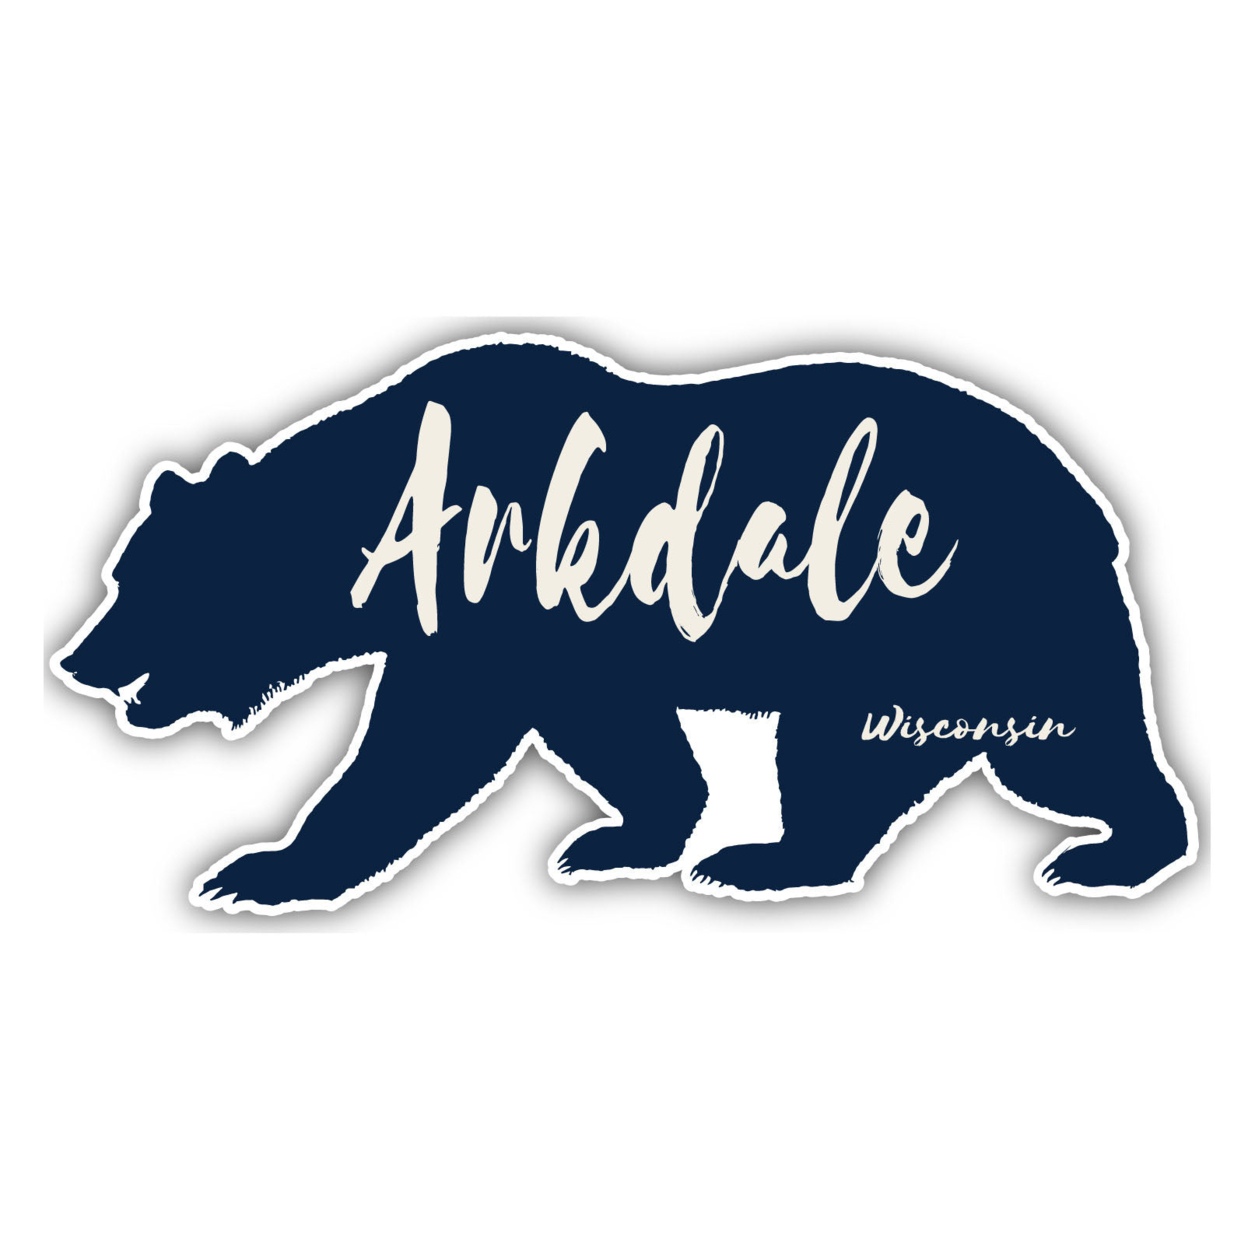 Arkdale Wisconsin Souvenir Decorative Stickers (Choose Theme And Size) - 4-Pack, 8-Inch, Tent